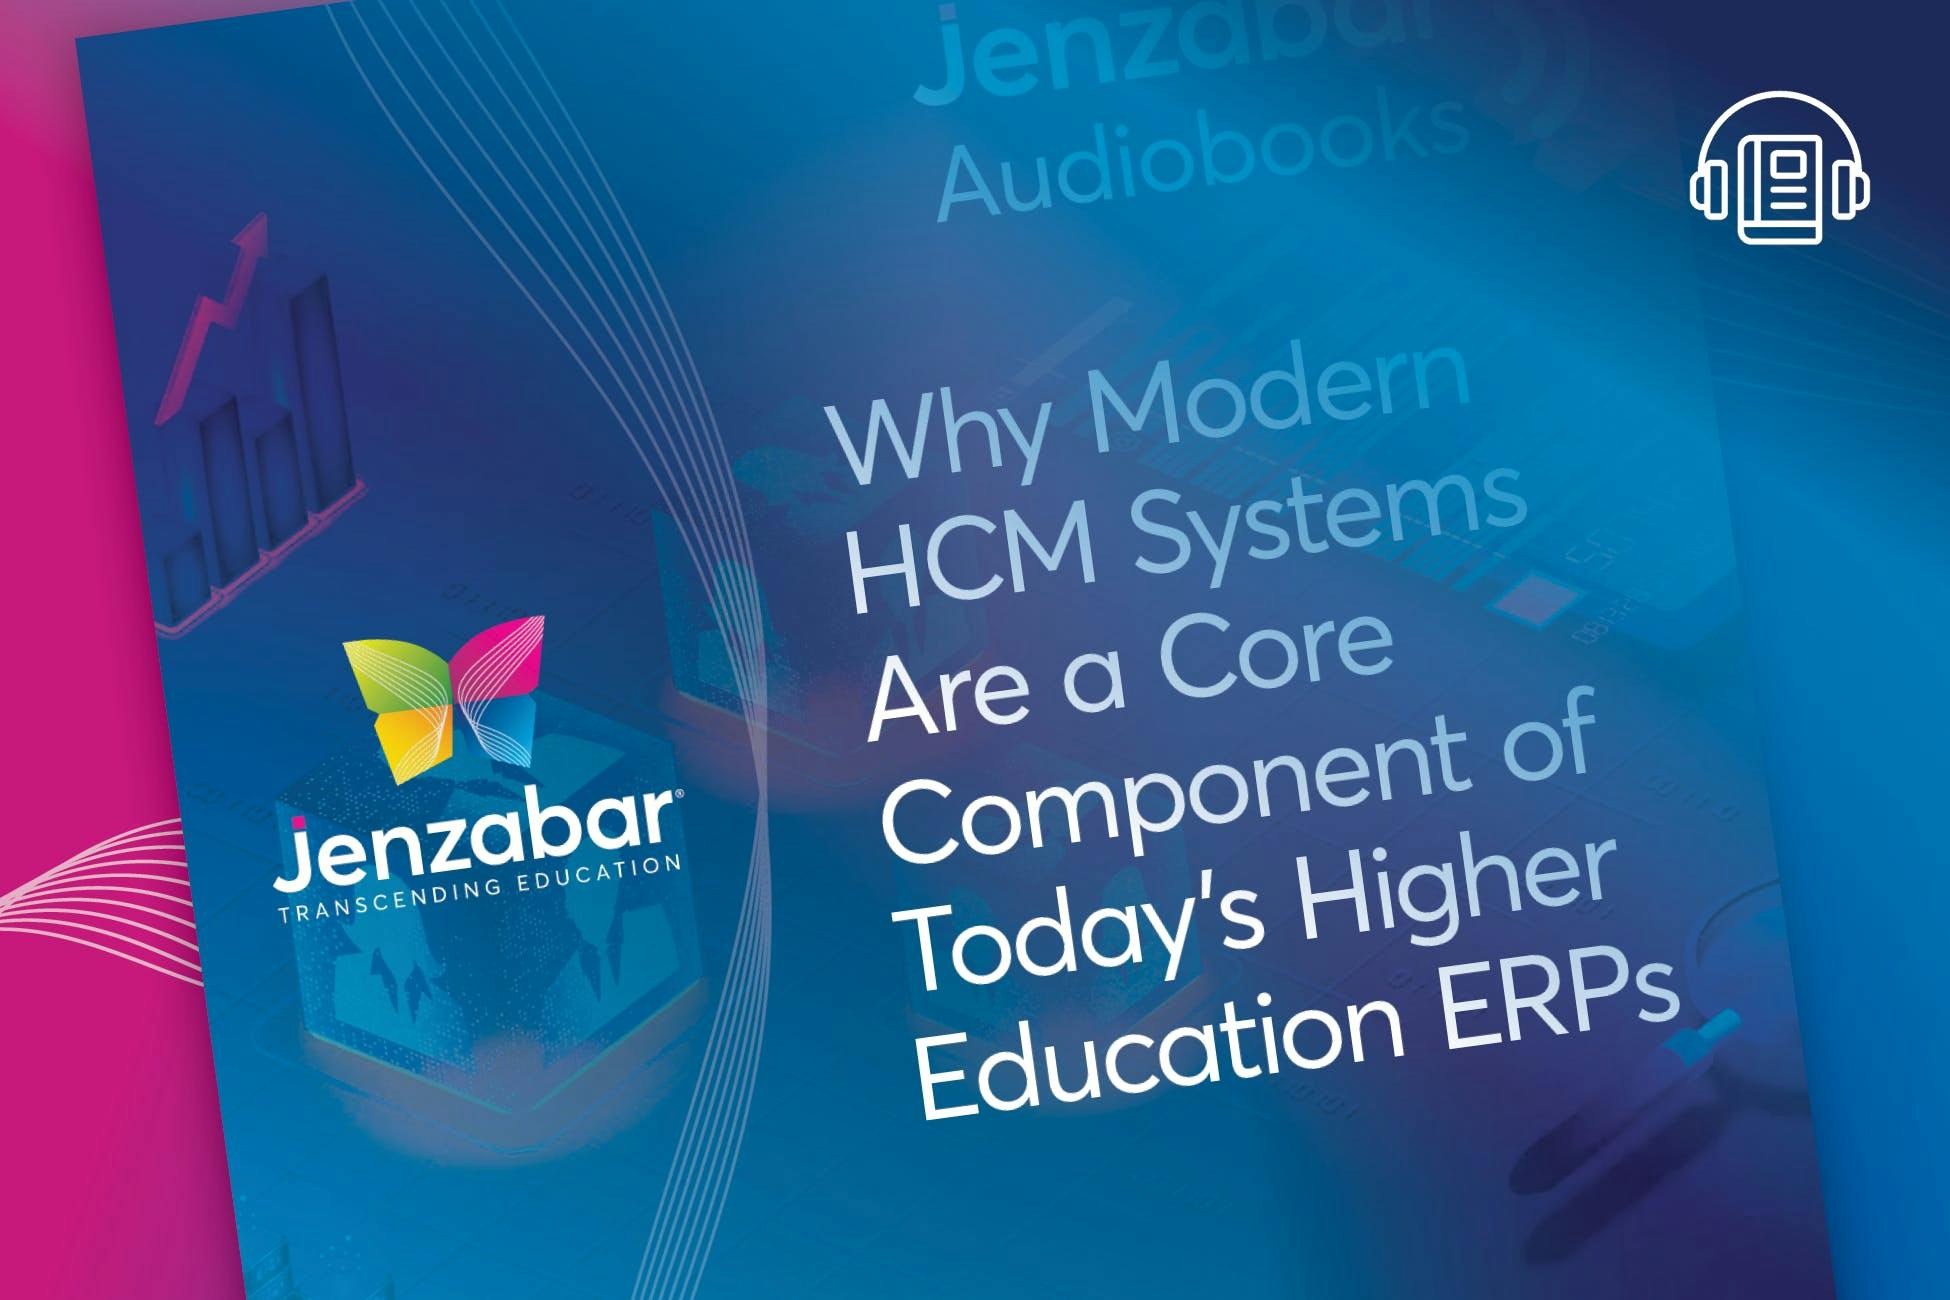 Audiobook: Why Modern HCM Systems Are a Core Component of Today's Higher Education ERPs